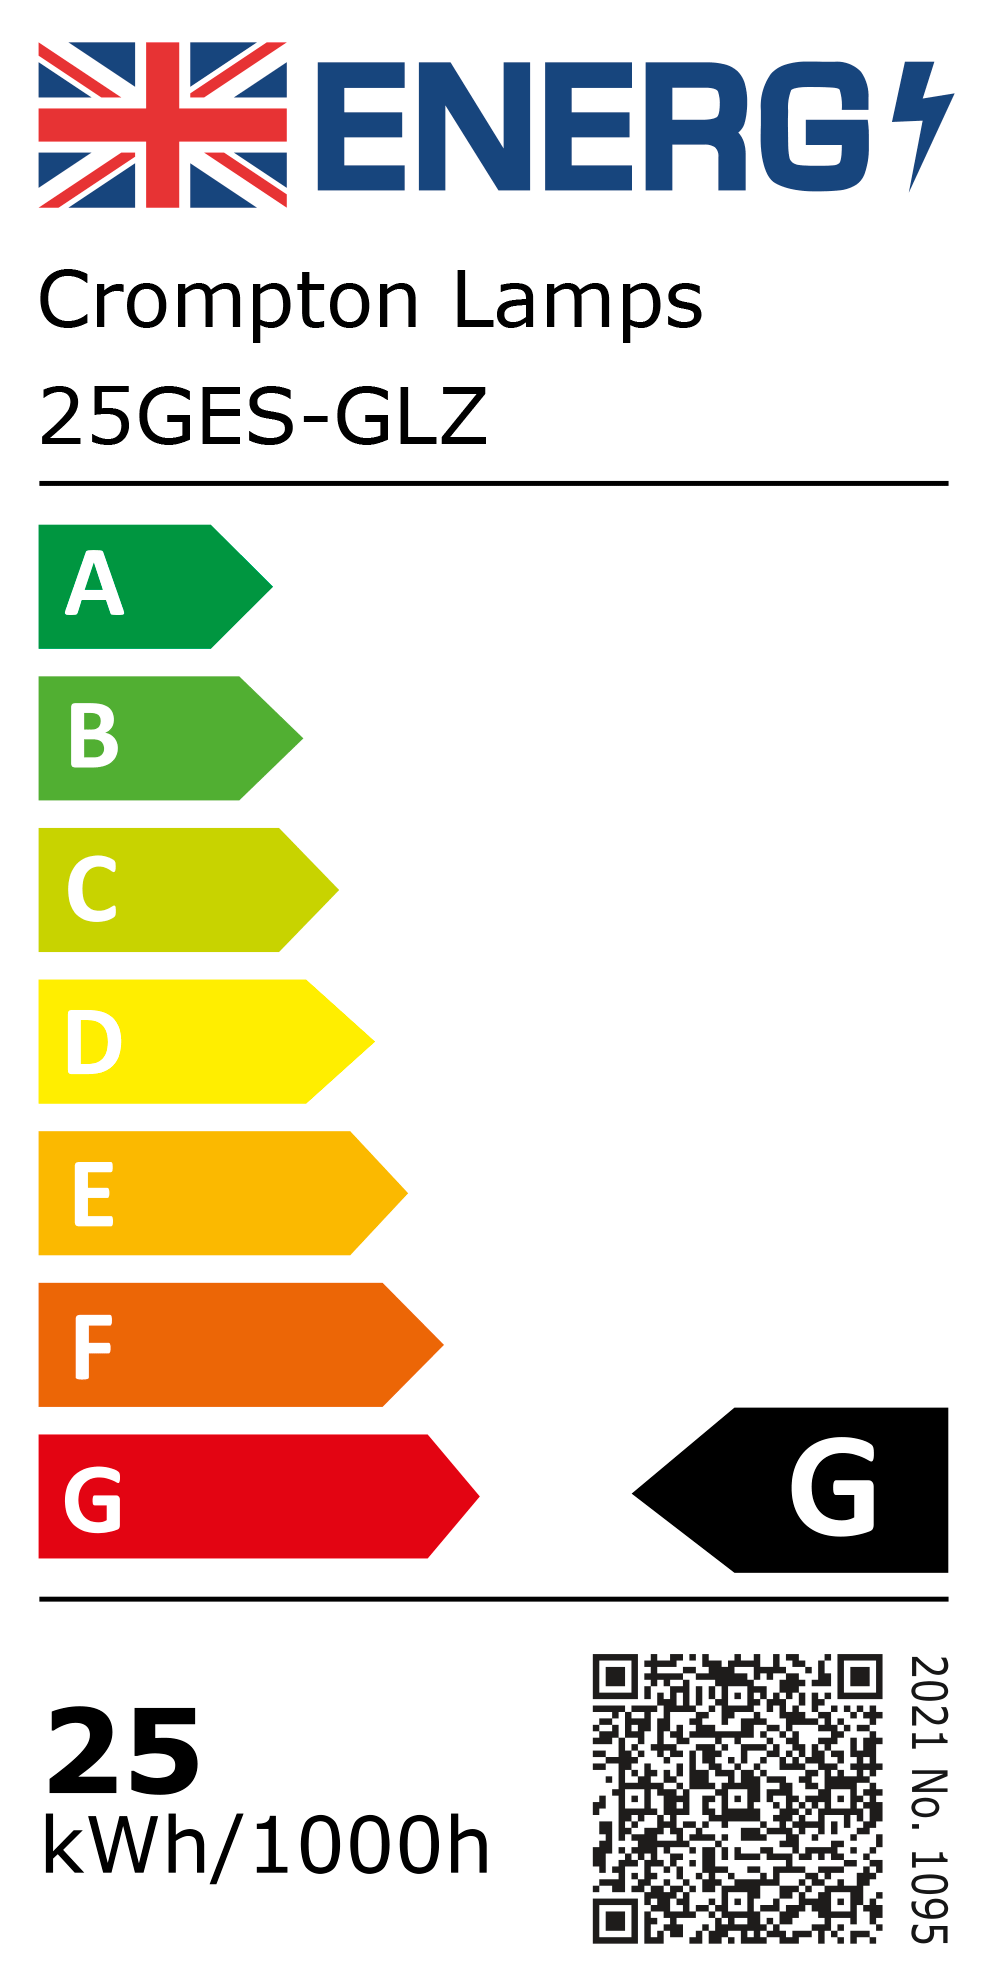 New 2021 Energy Rating Label: Stock Code 25GES-GLZ